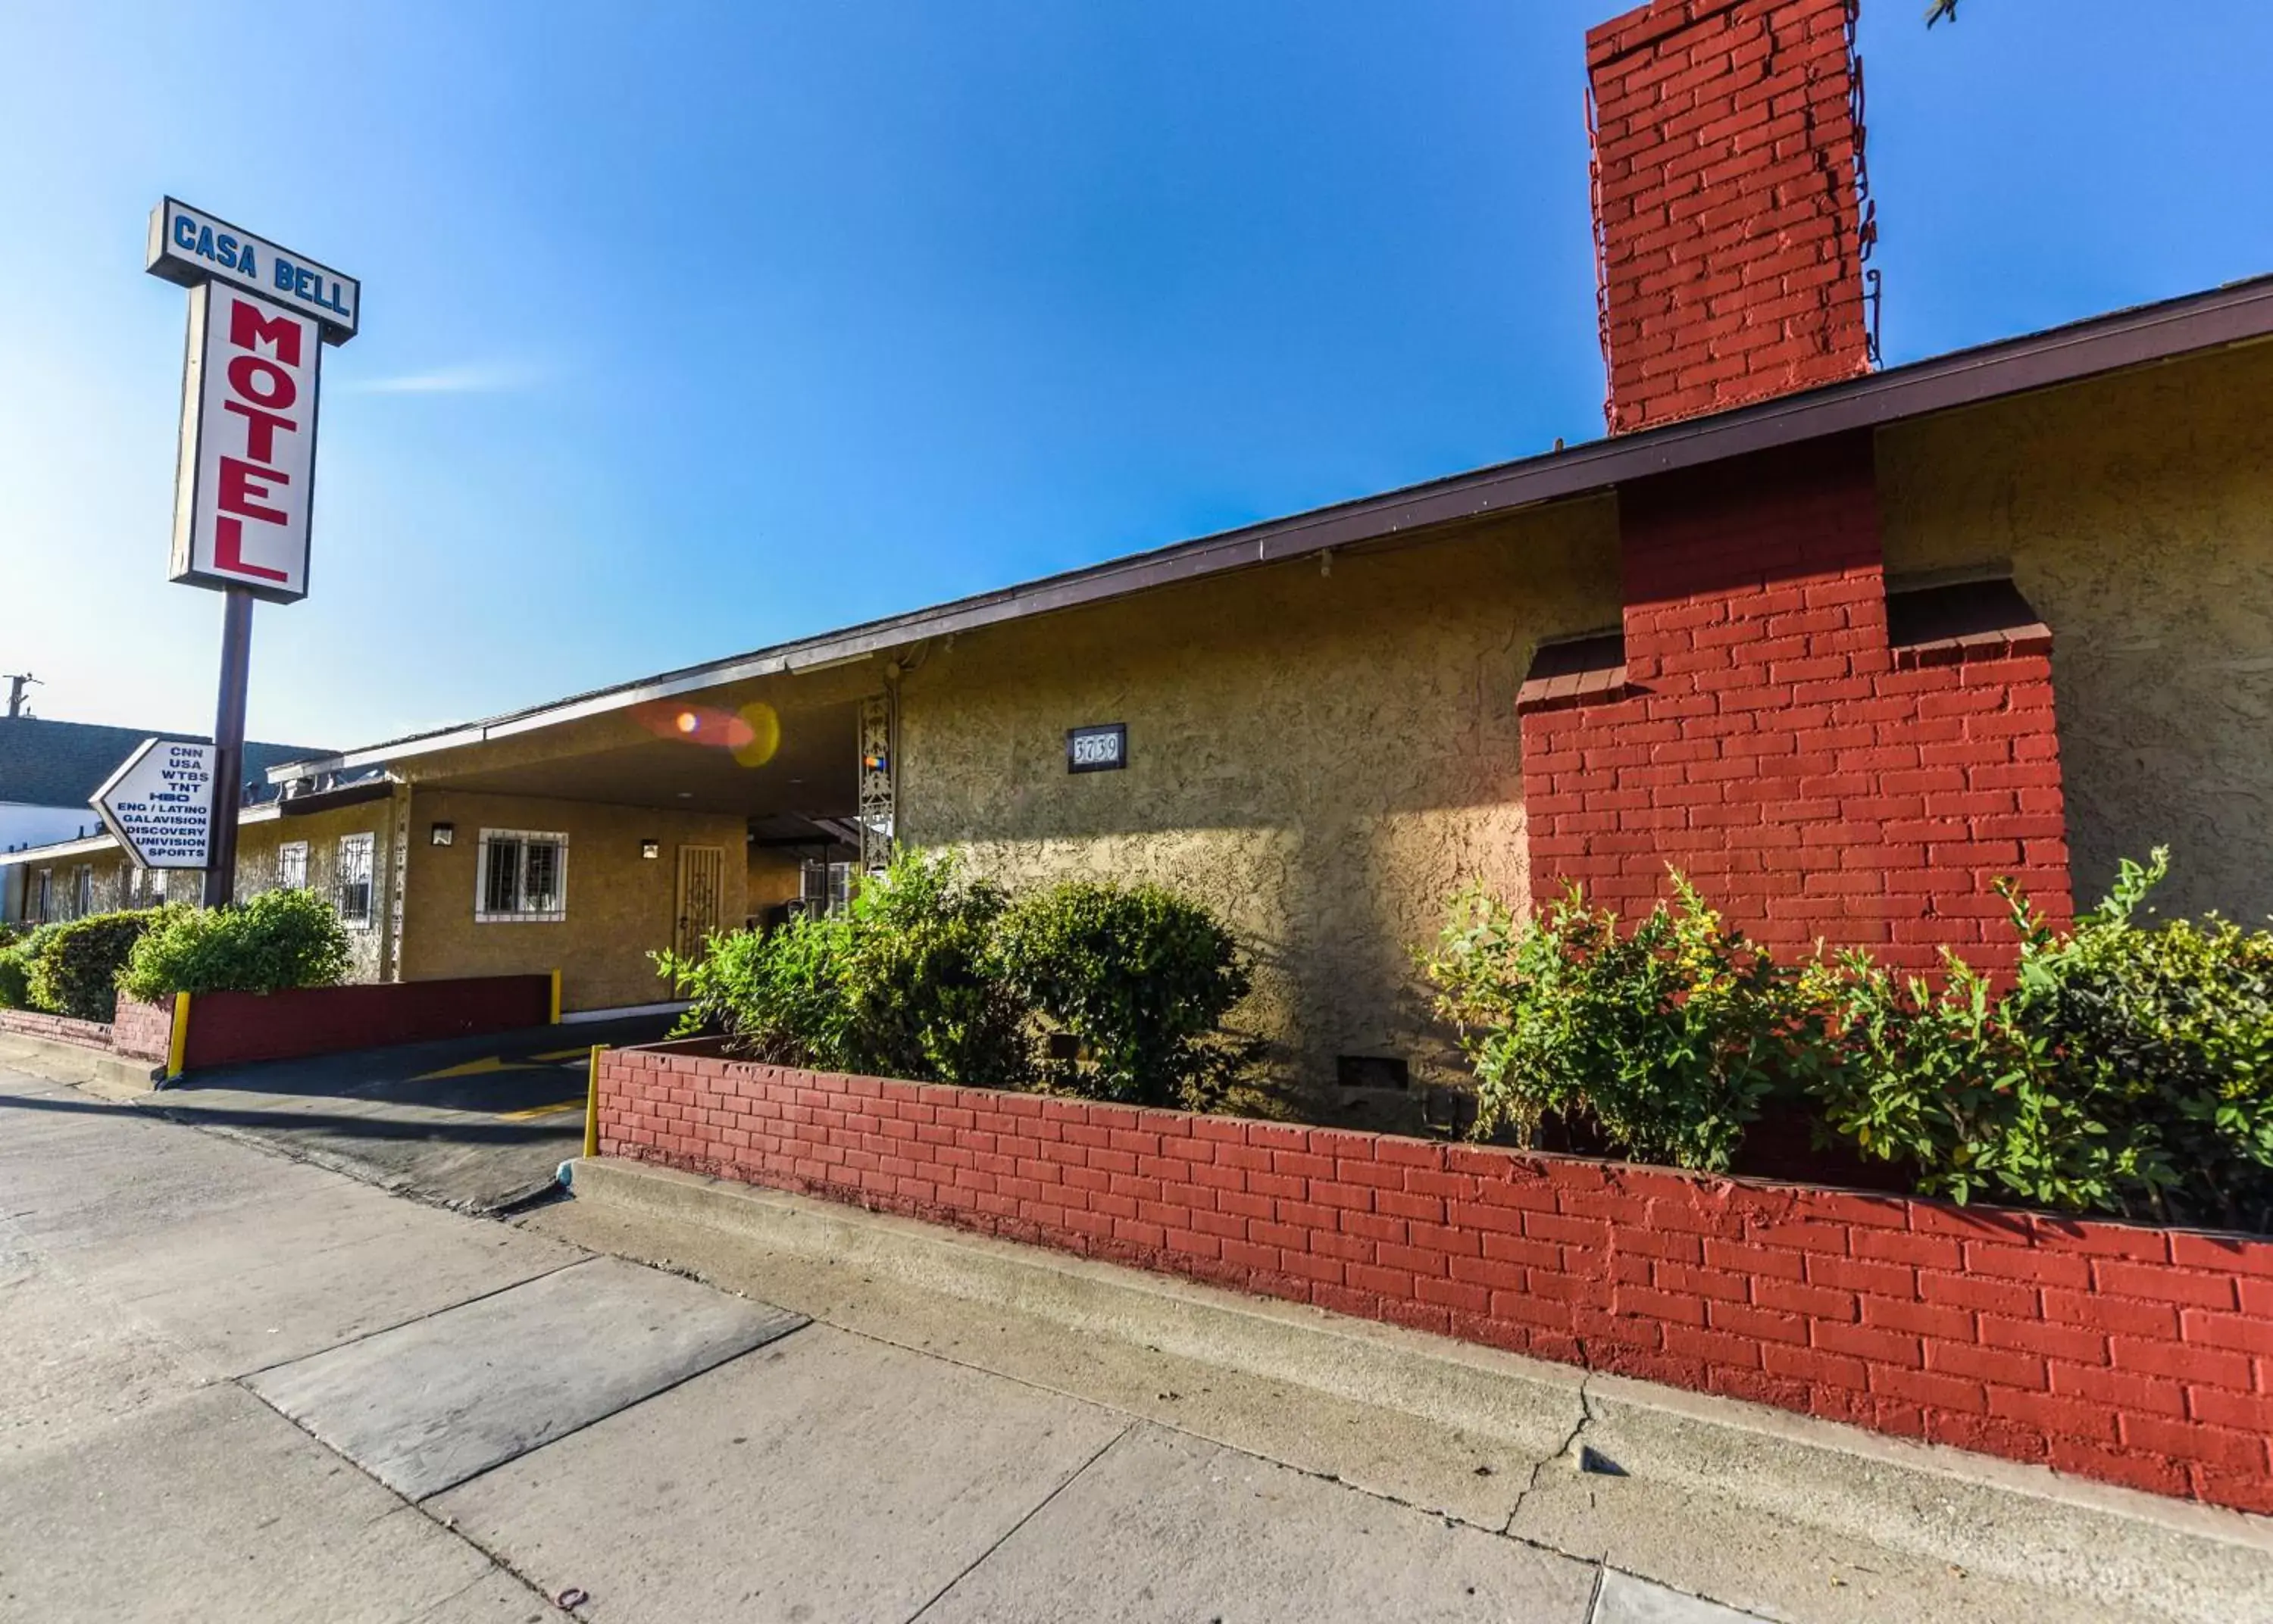 Property Building in Casa Bell Motel, Los Angeles - LAX Airport